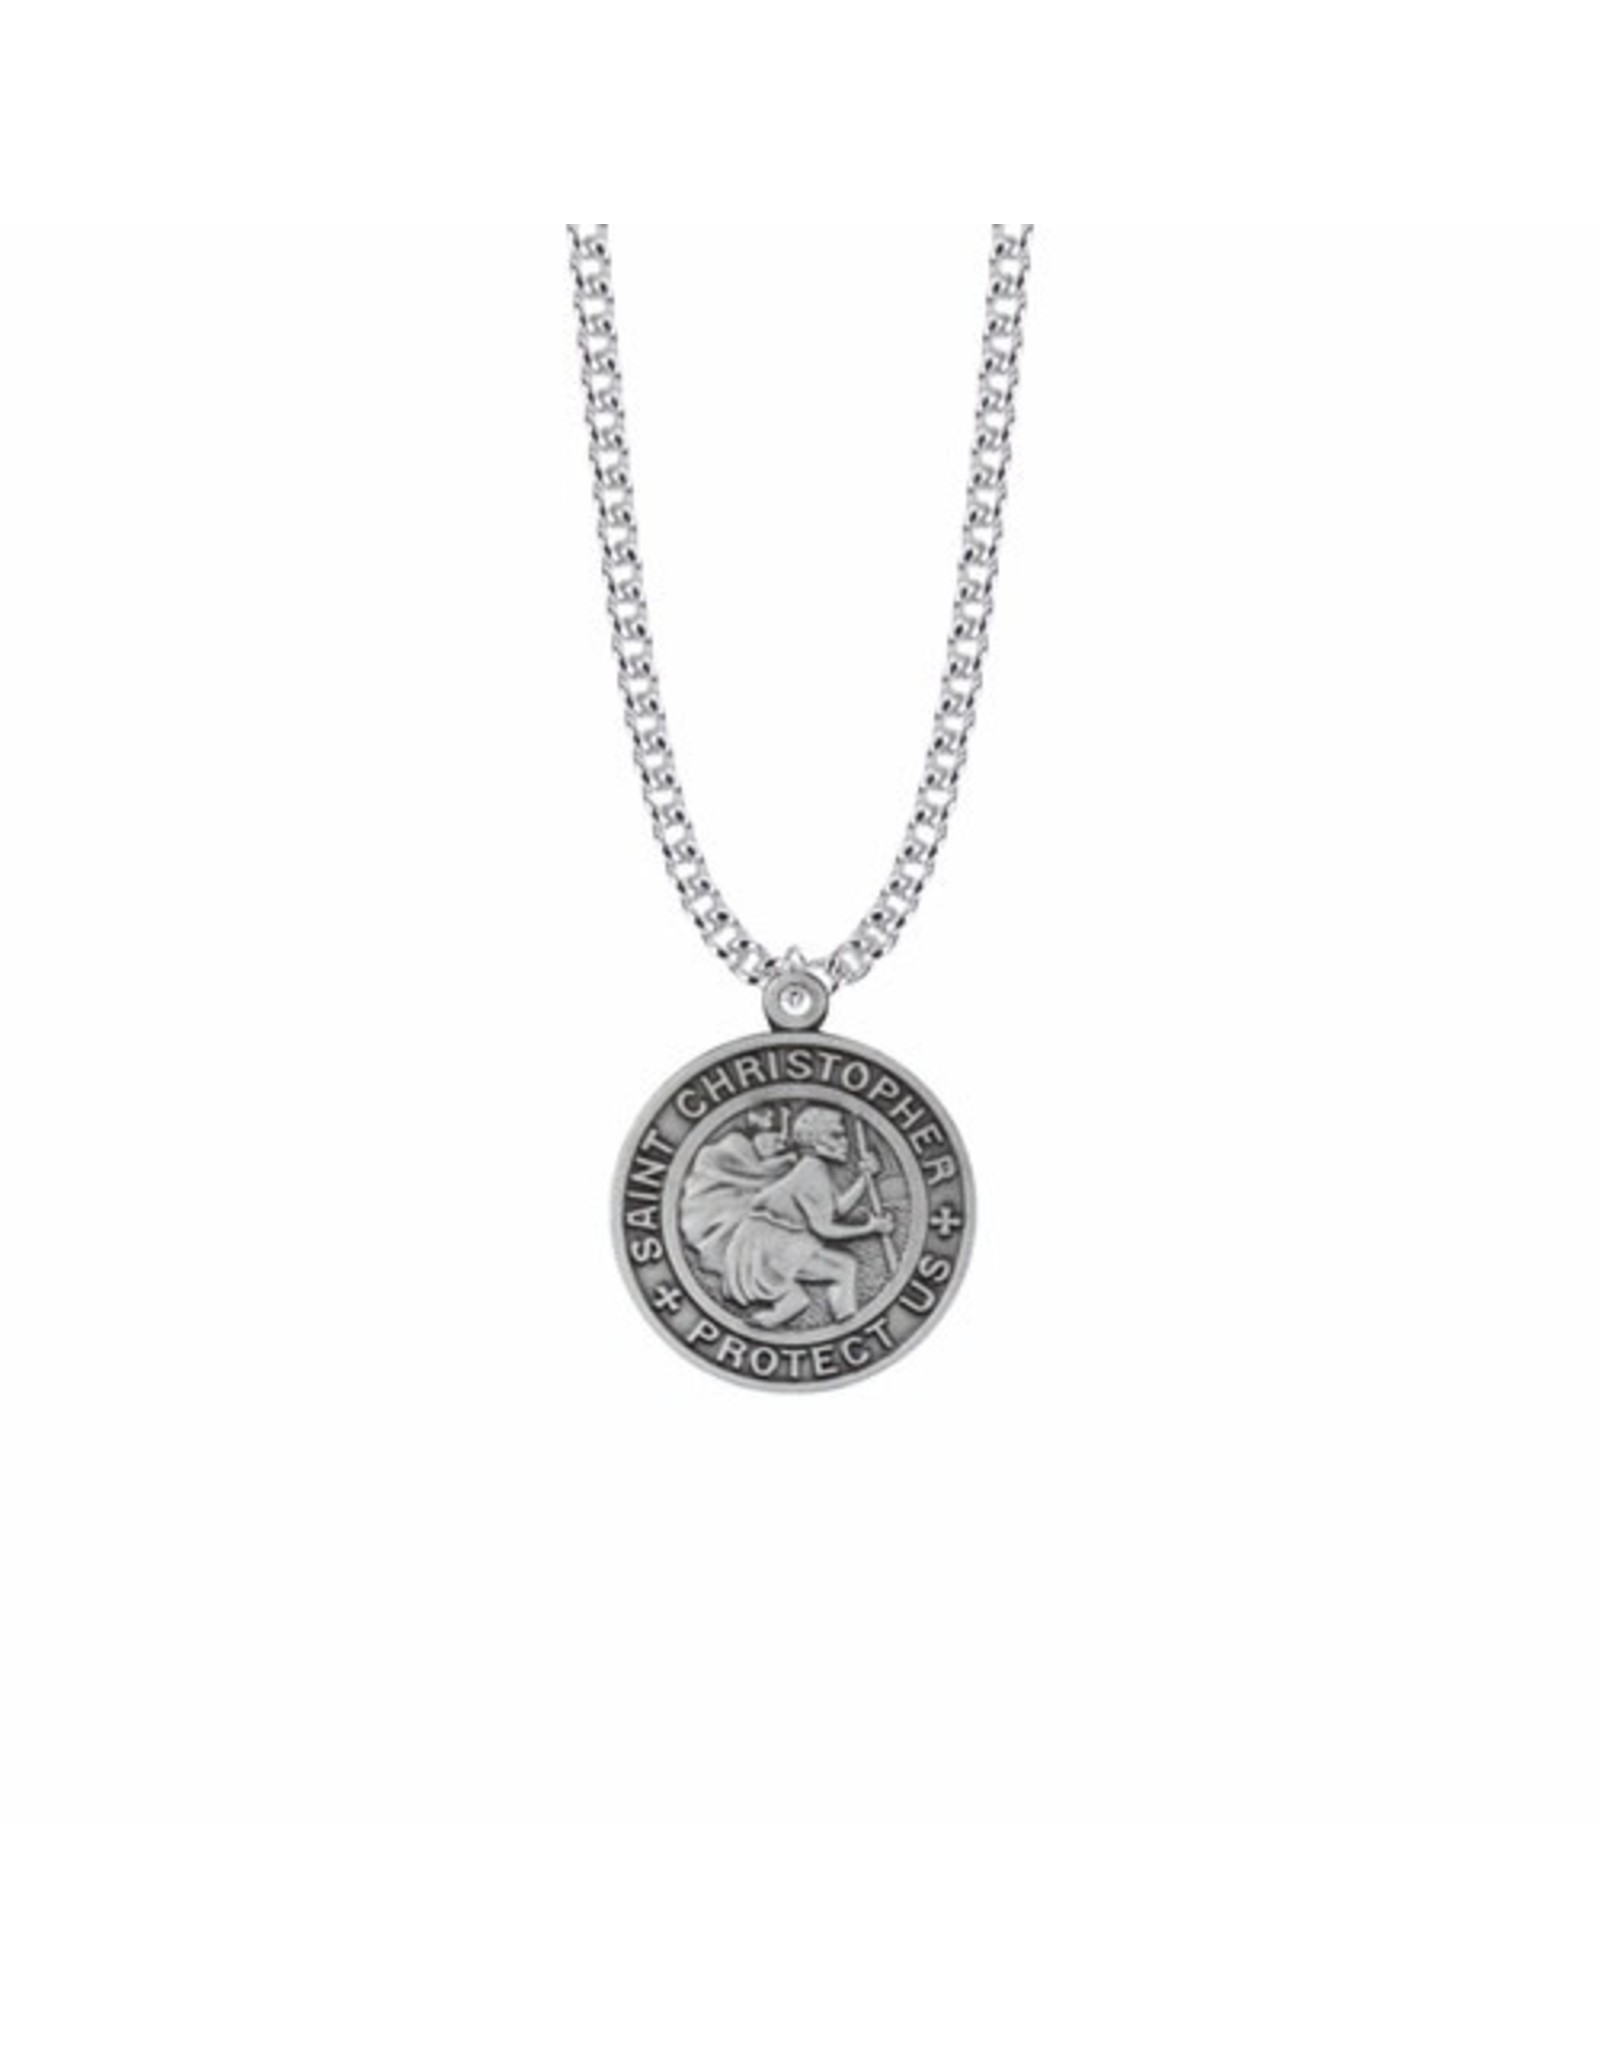 Singer Pewter St. Christopher Large Round Medal on 18" Chain